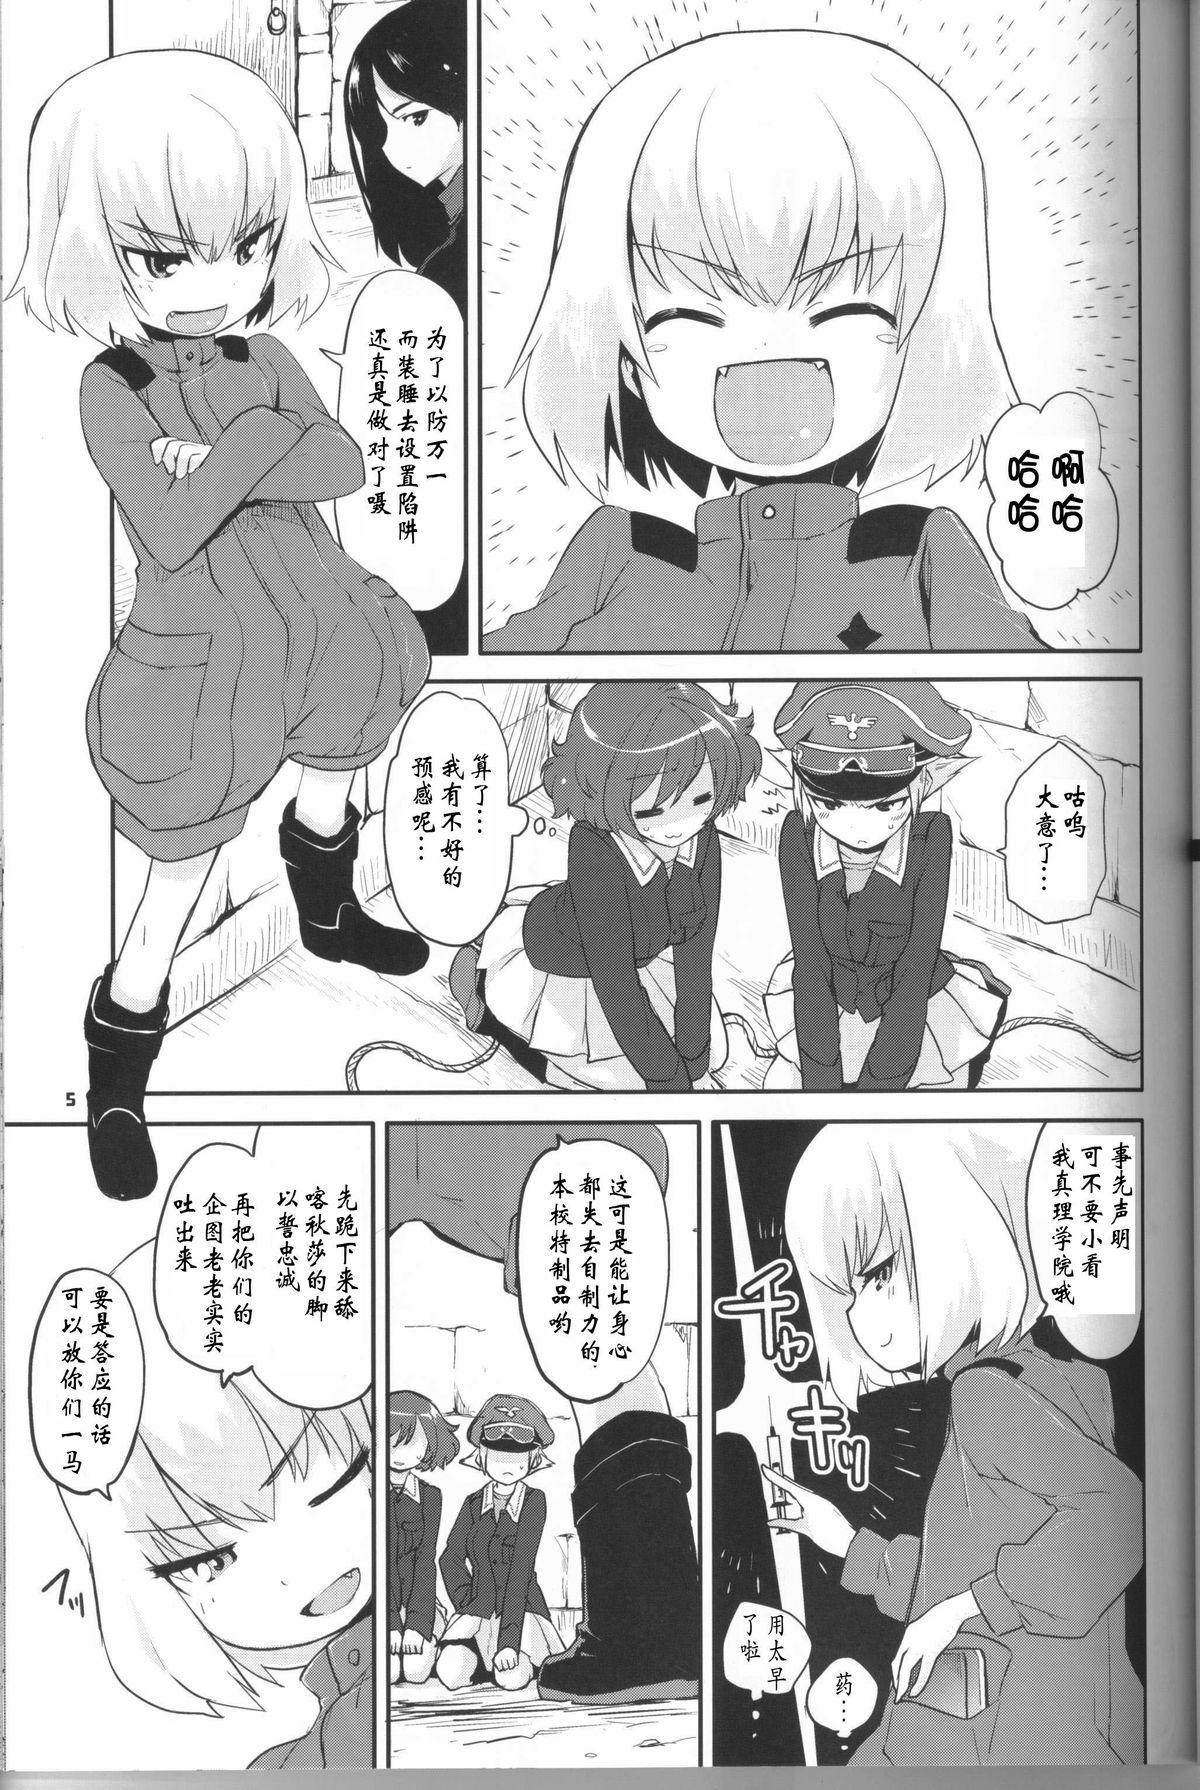 Bangbros The General Frost Has Come! - Girls und panzer Slapping - Page 4